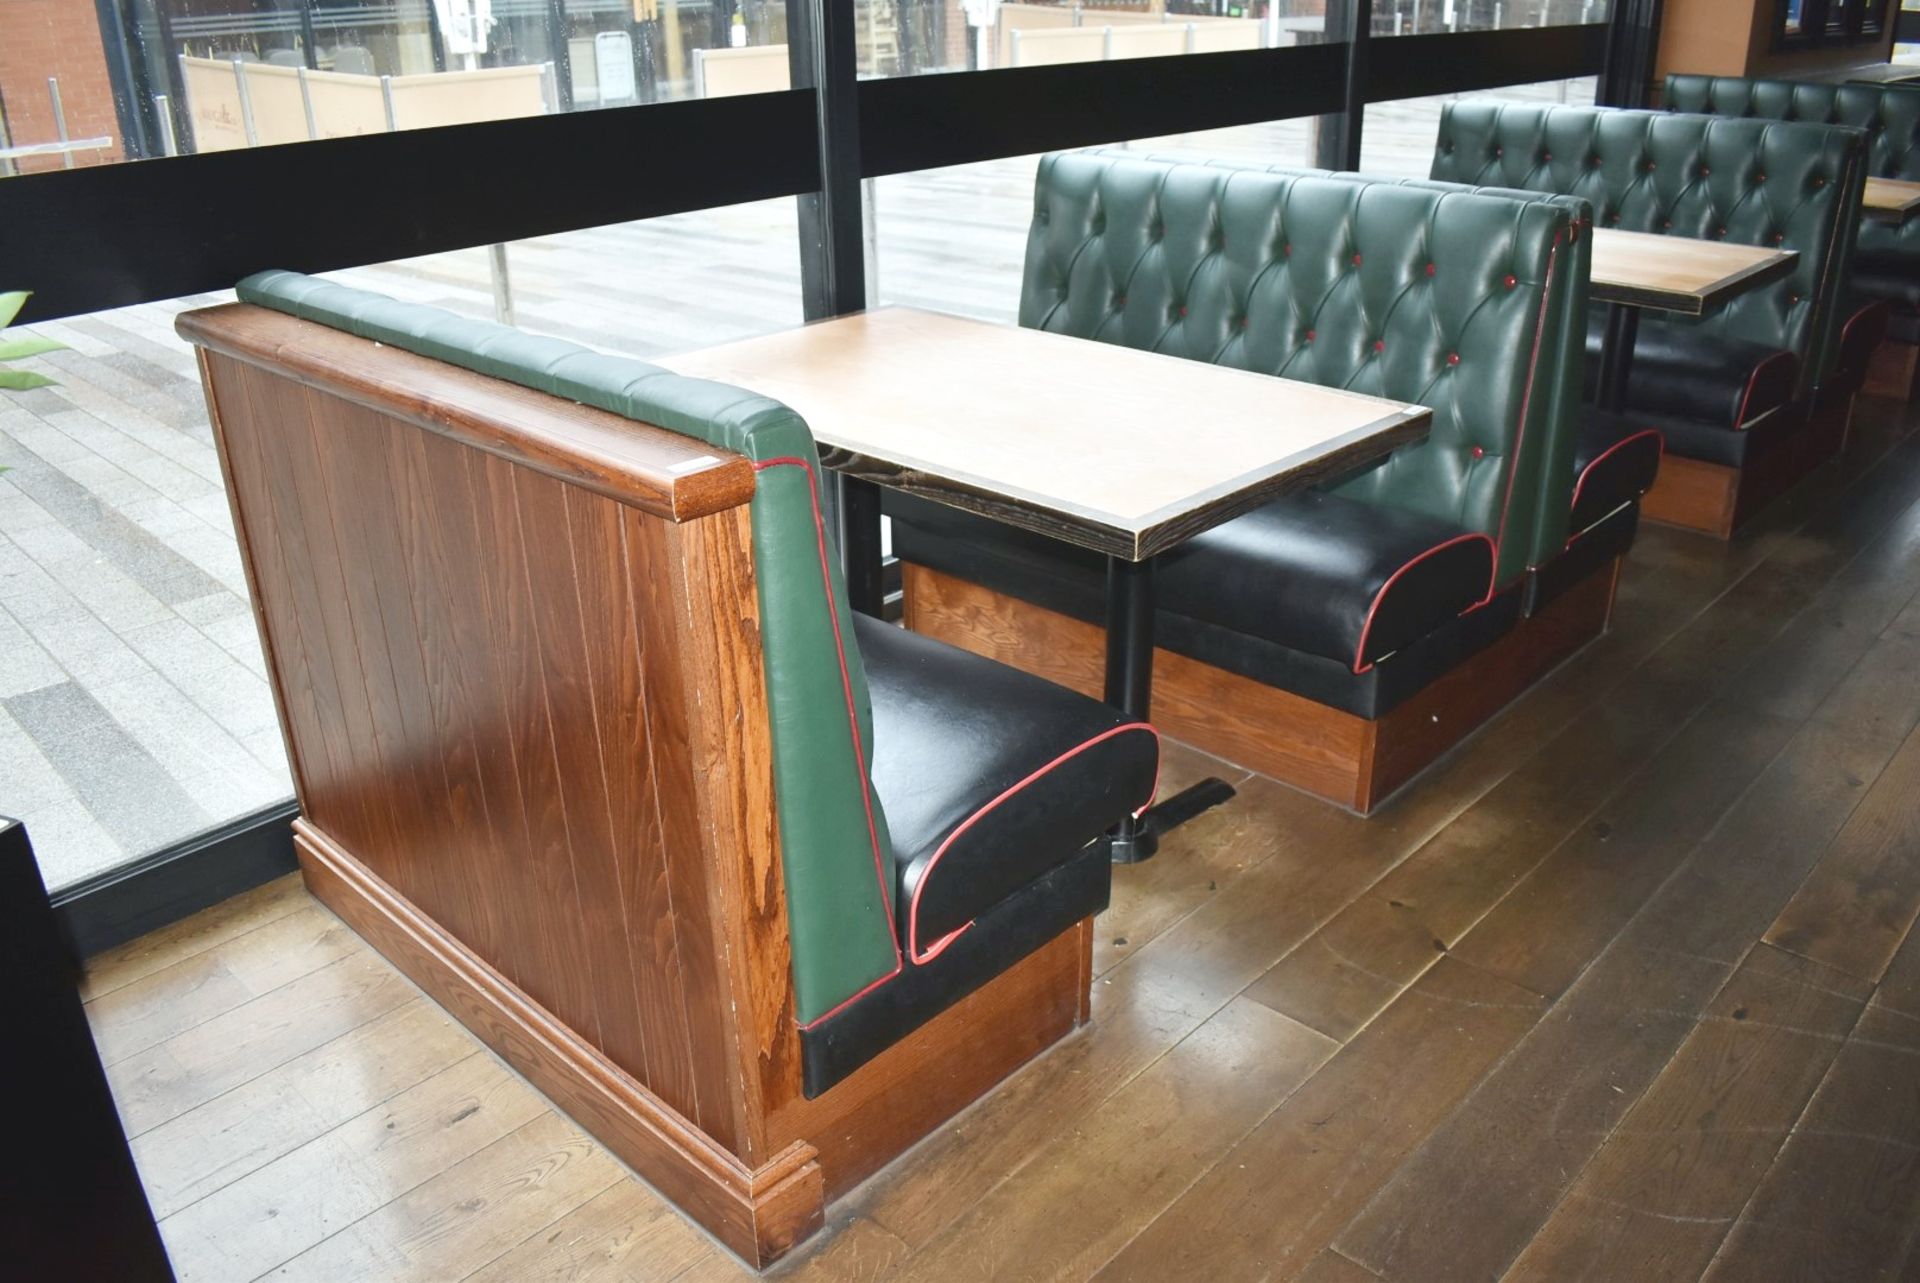 4 x Sections of Restaurant Double Booth Seating - Sits Up to 12 Persons - Green & Black Upholstery - Image 20 of 24